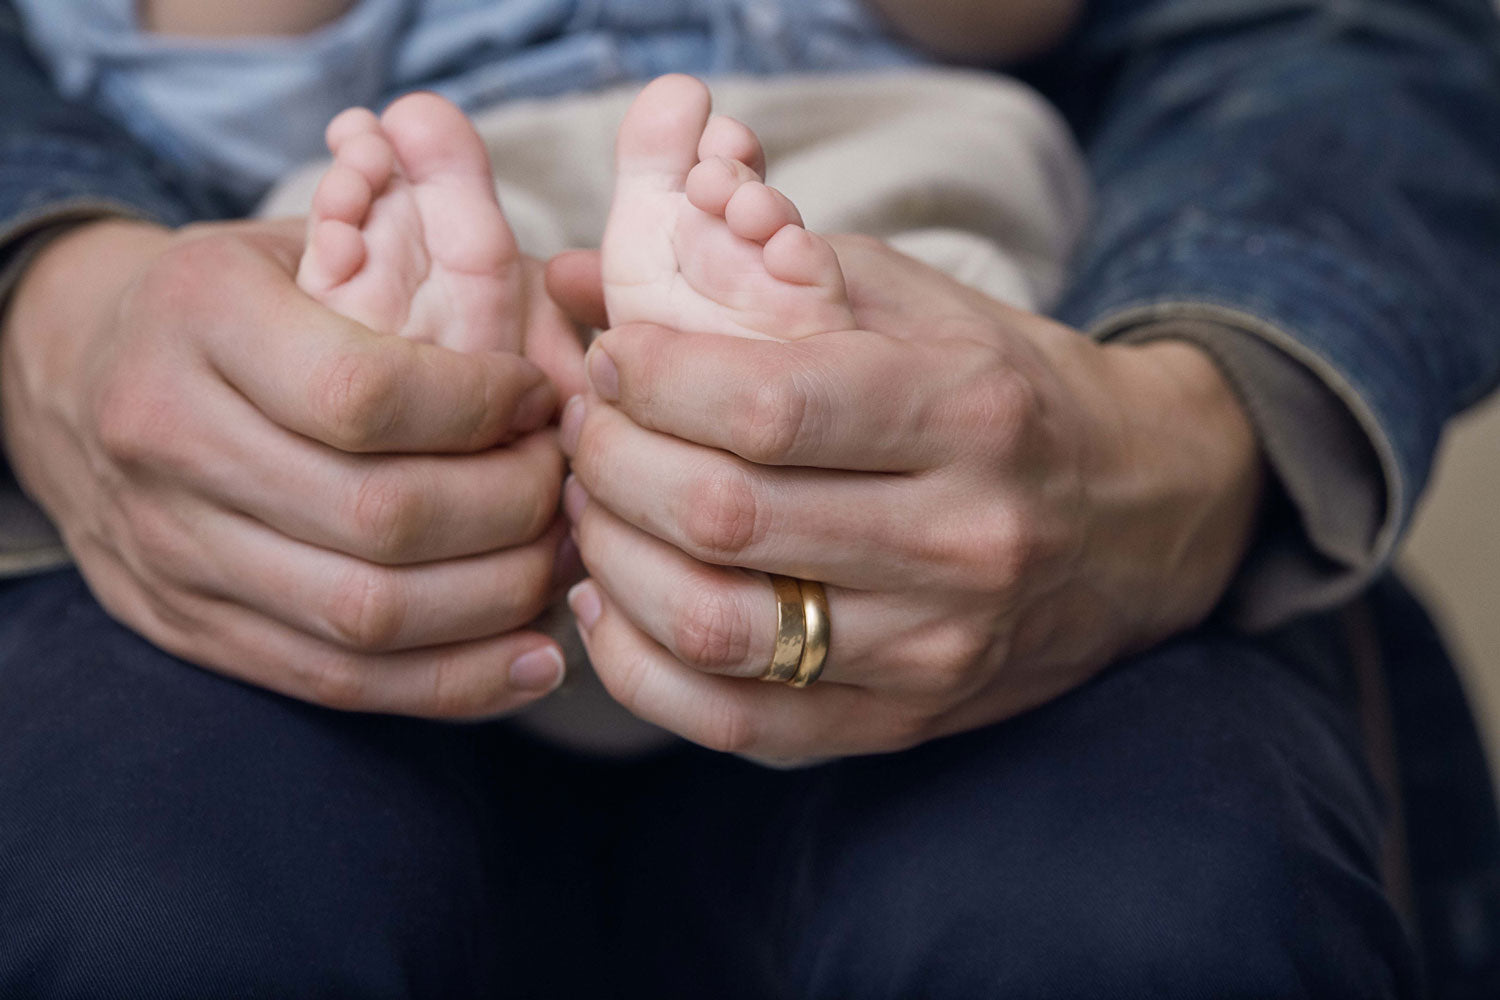 A baby sit's on their father's lap. The father's hands are gently wrapped around the baby toes while the father wears a men's wedding band by Anna Sheffield.